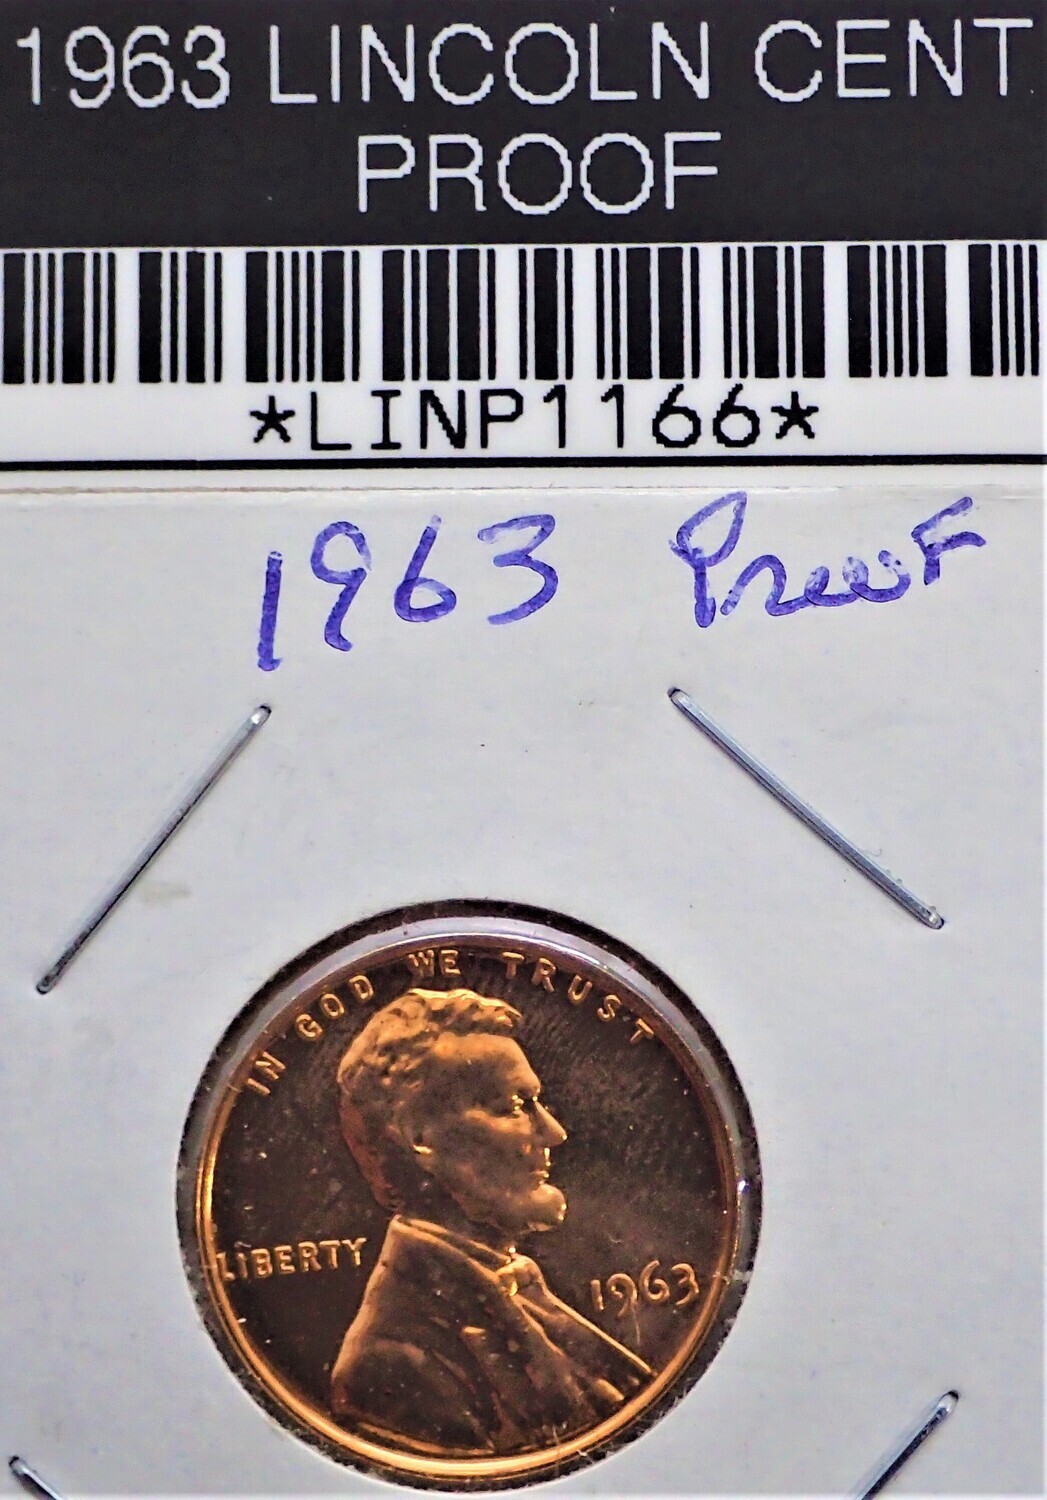 1963 LINCOLN CENT PROOF LINP1166